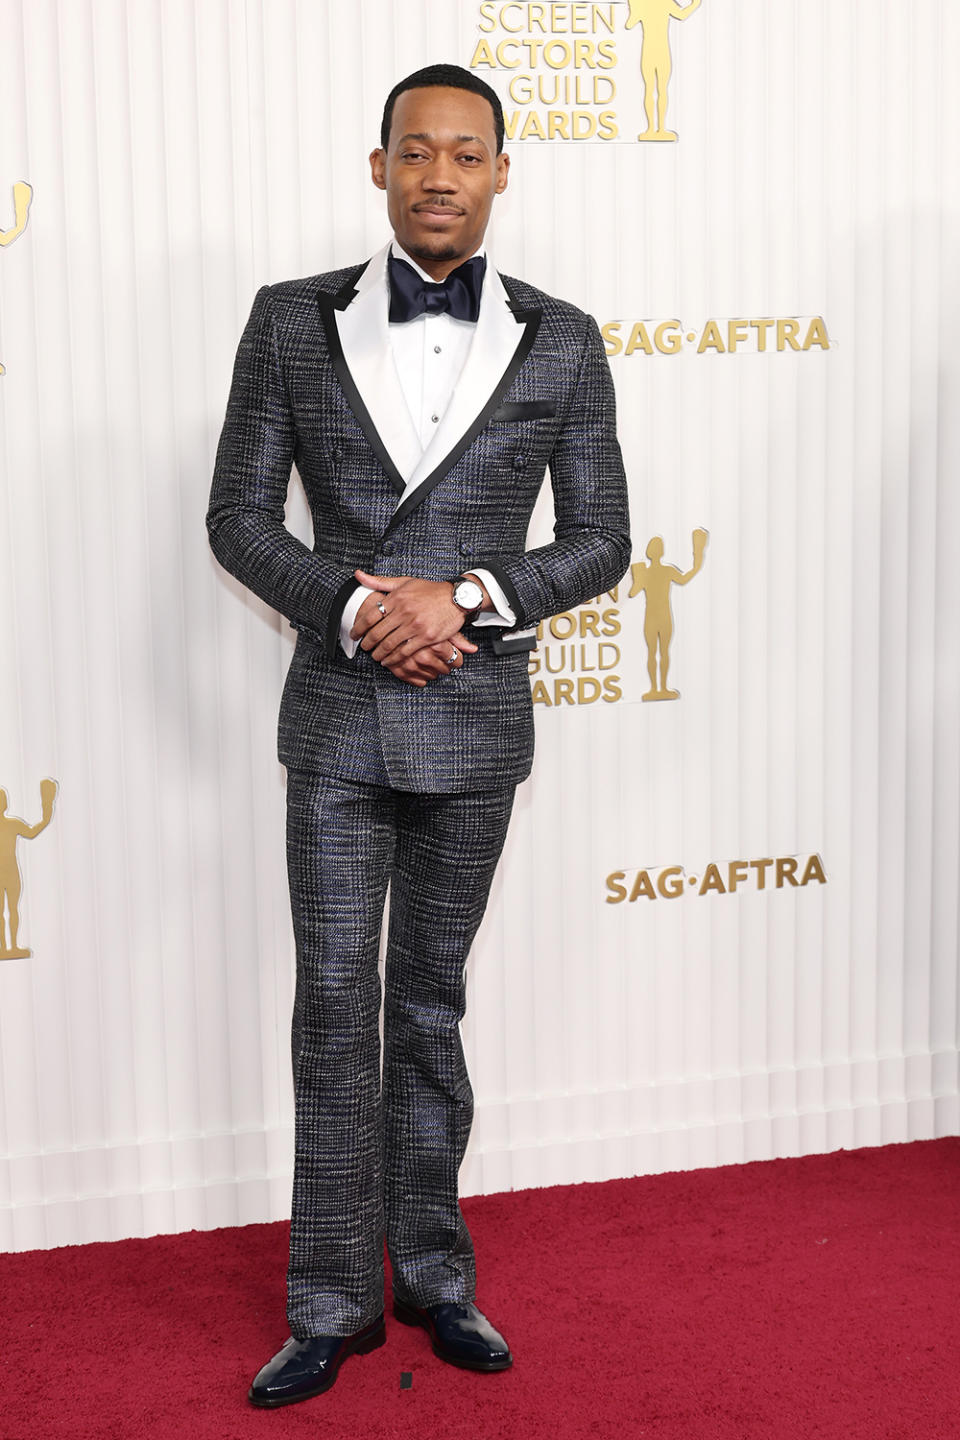 LOS ANGELES, CALIFORNIA - FEBRUARY 26: Tyler James Williams attends the 29th Annual Screen Actors Guild Awards at Fairmont Century Plaza on February 26, 2023 in Los Angeles, California. (Photo by Amy Sussman/WireImage)